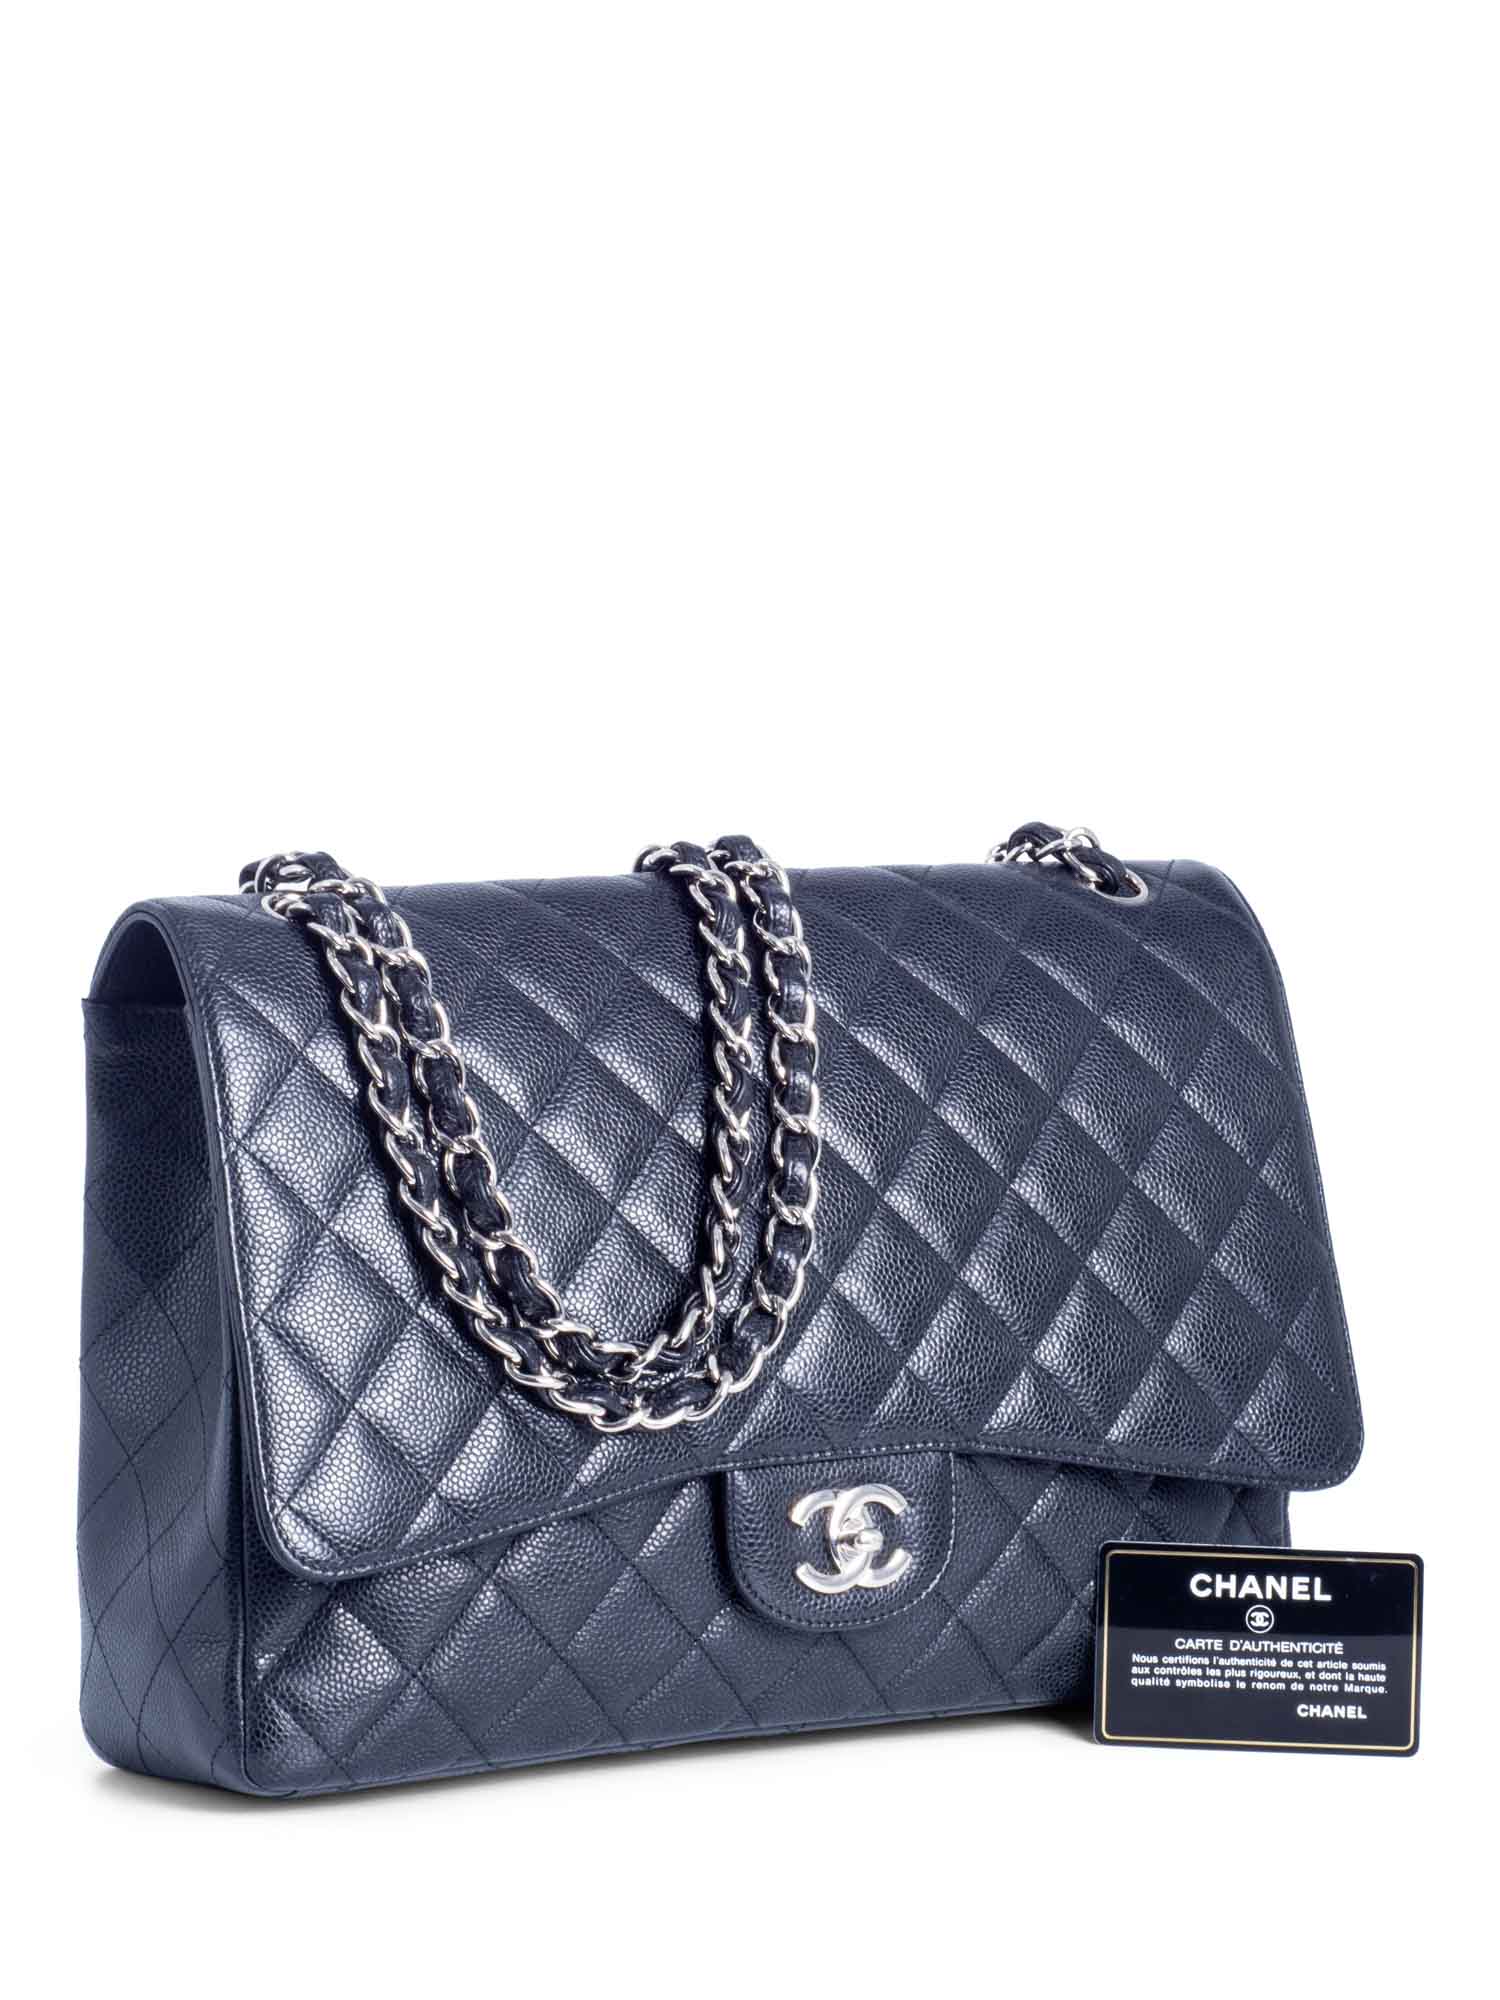 Chanel Handbag Prices Have Gone Up by 60 Since 2019 Aiming for Hermes  Status  Bloomberg